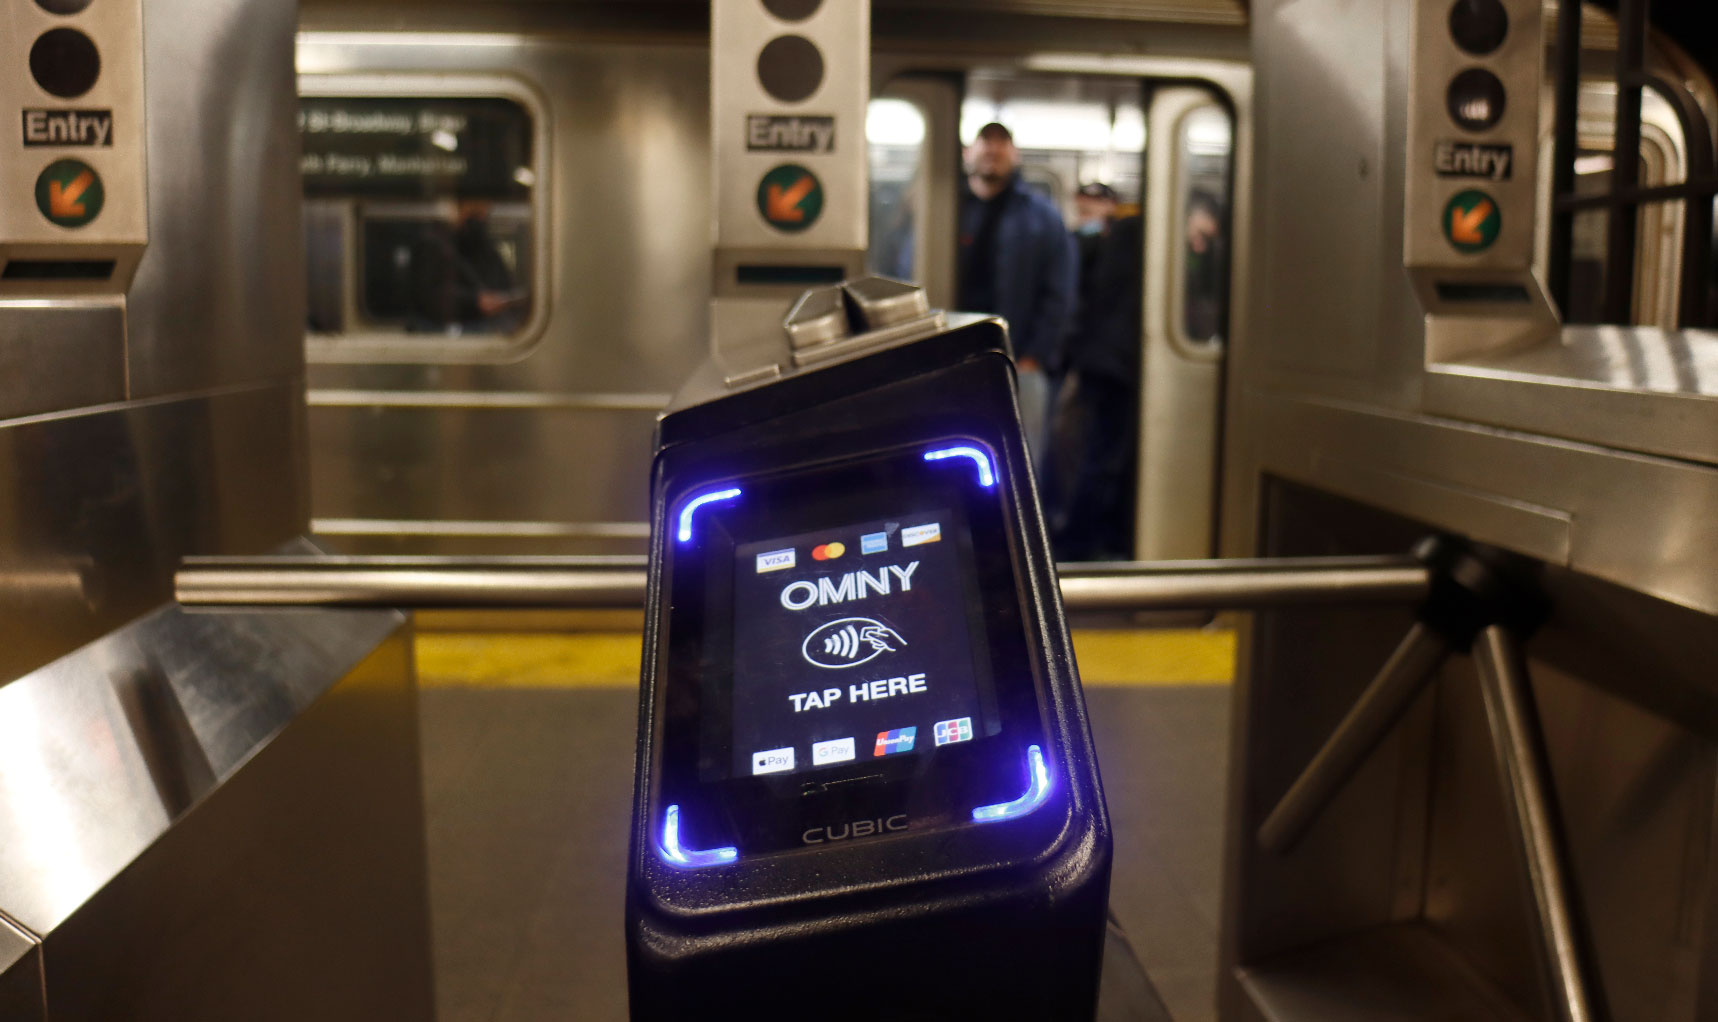 NEW YORK, NY - MARCH 5: An OMNY fare reader is pictured in front of a '1 line train at the Christopher Street subway station on March 5, 2023, in New York City. (Photo by Gary Hershorn/Getty Images)